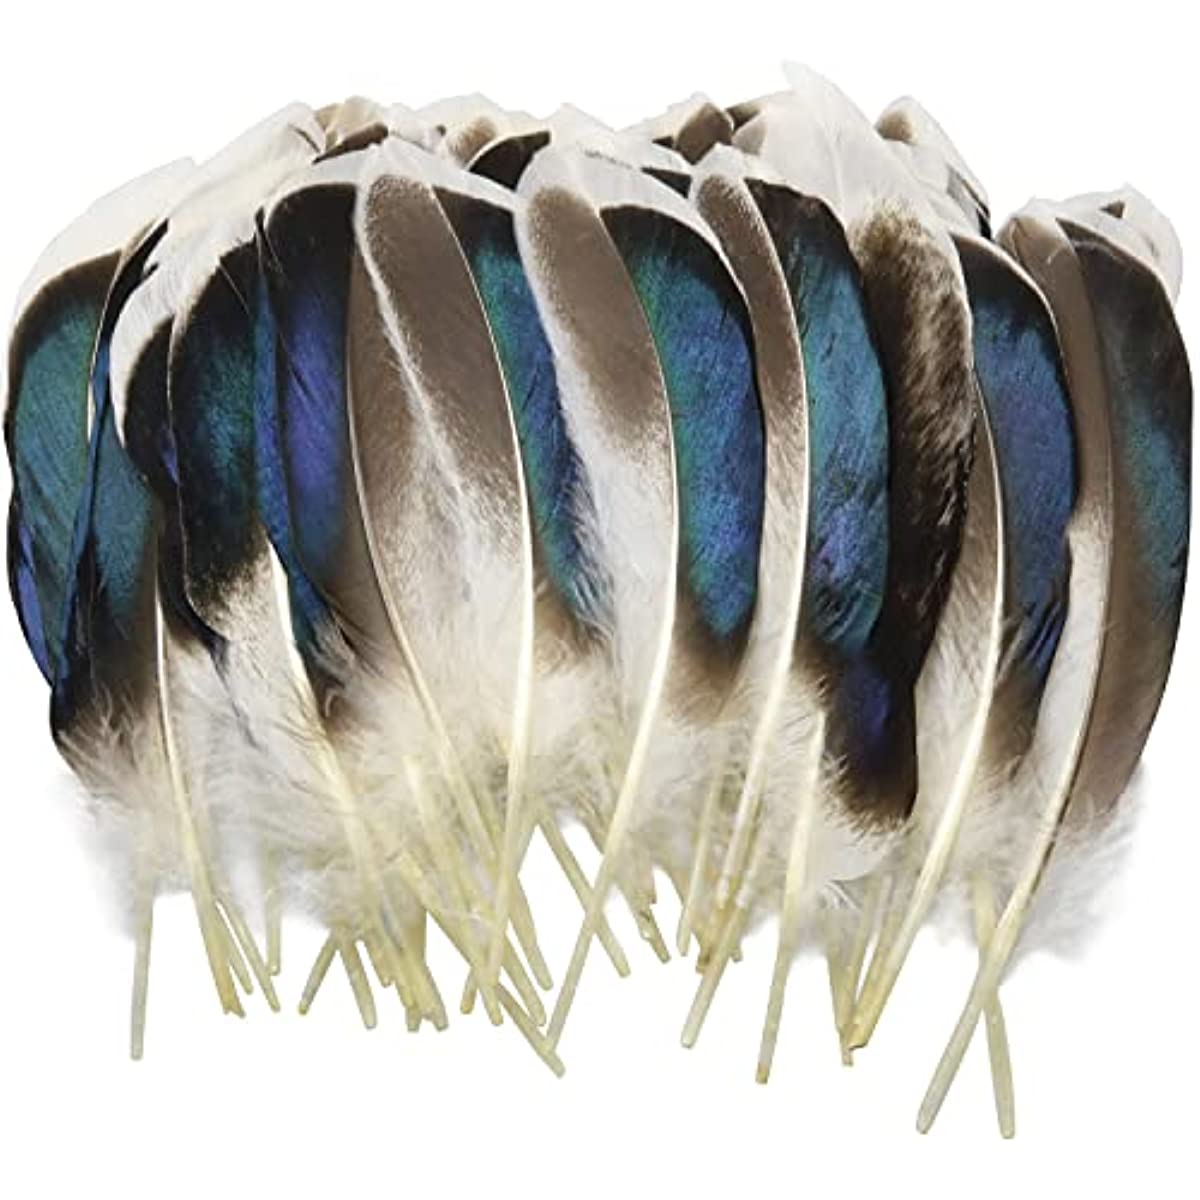 Peacock Feather Plumage-Blue [{WEDDING CENTERPIECES}] - Natural